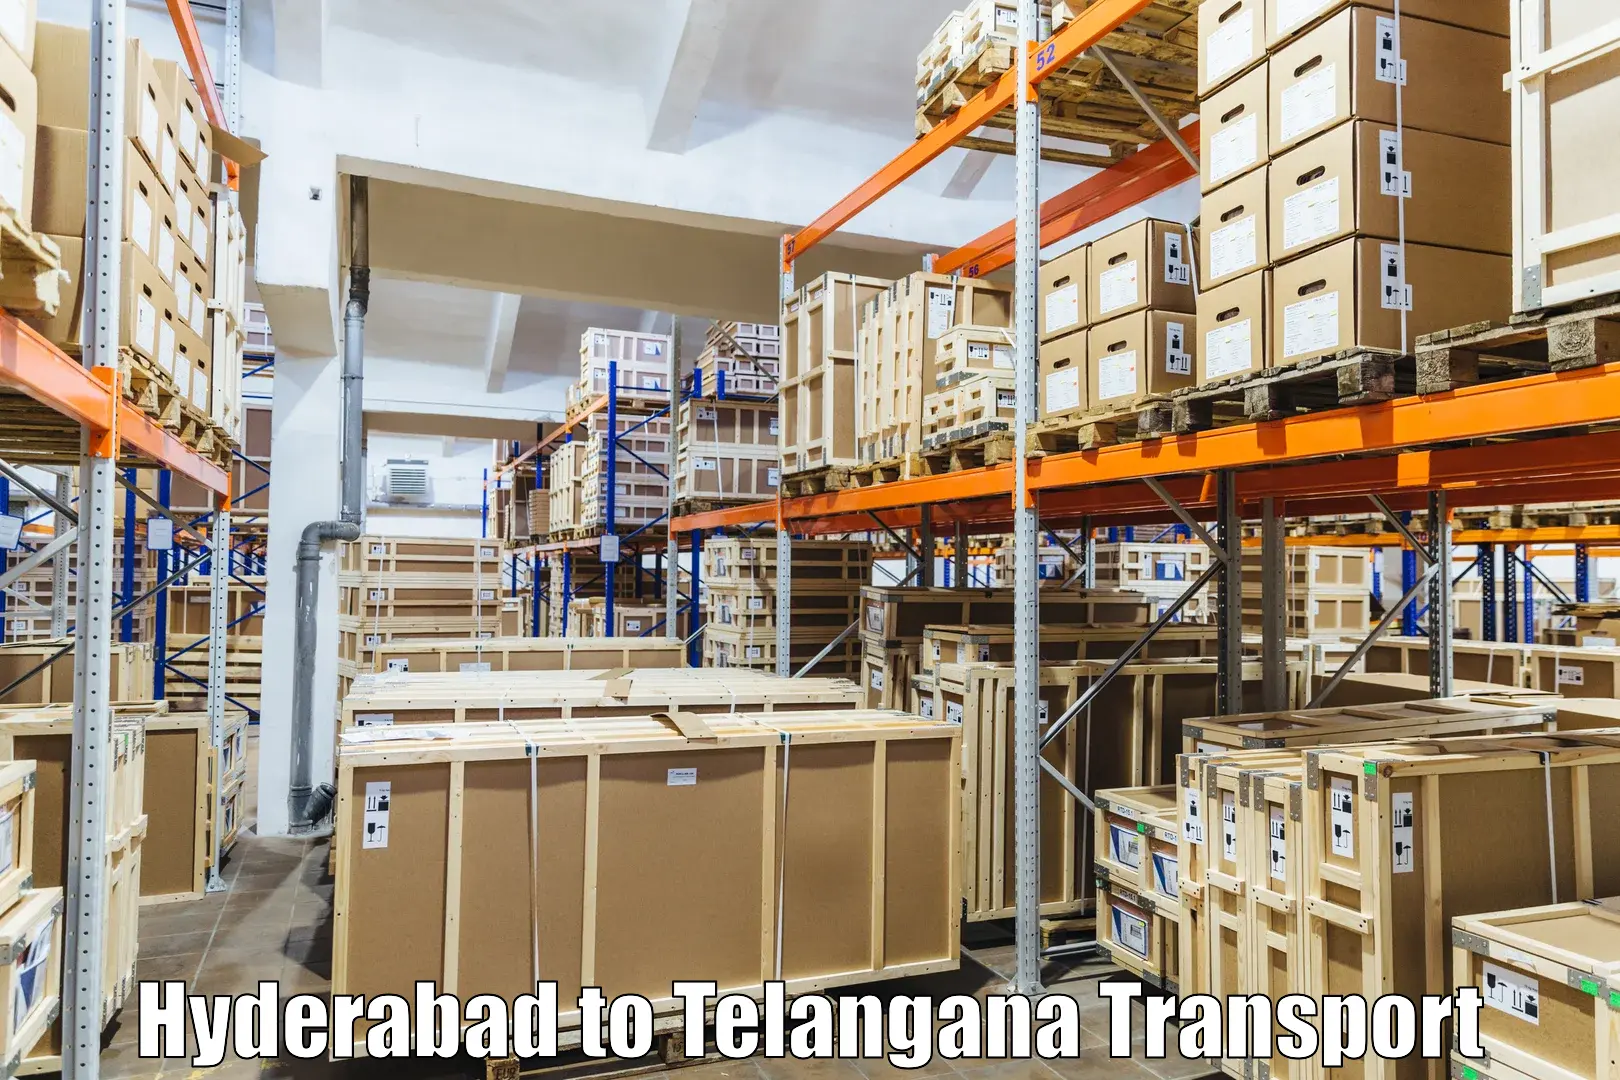 Interstate transport services in Hyderabad to Rangareddy